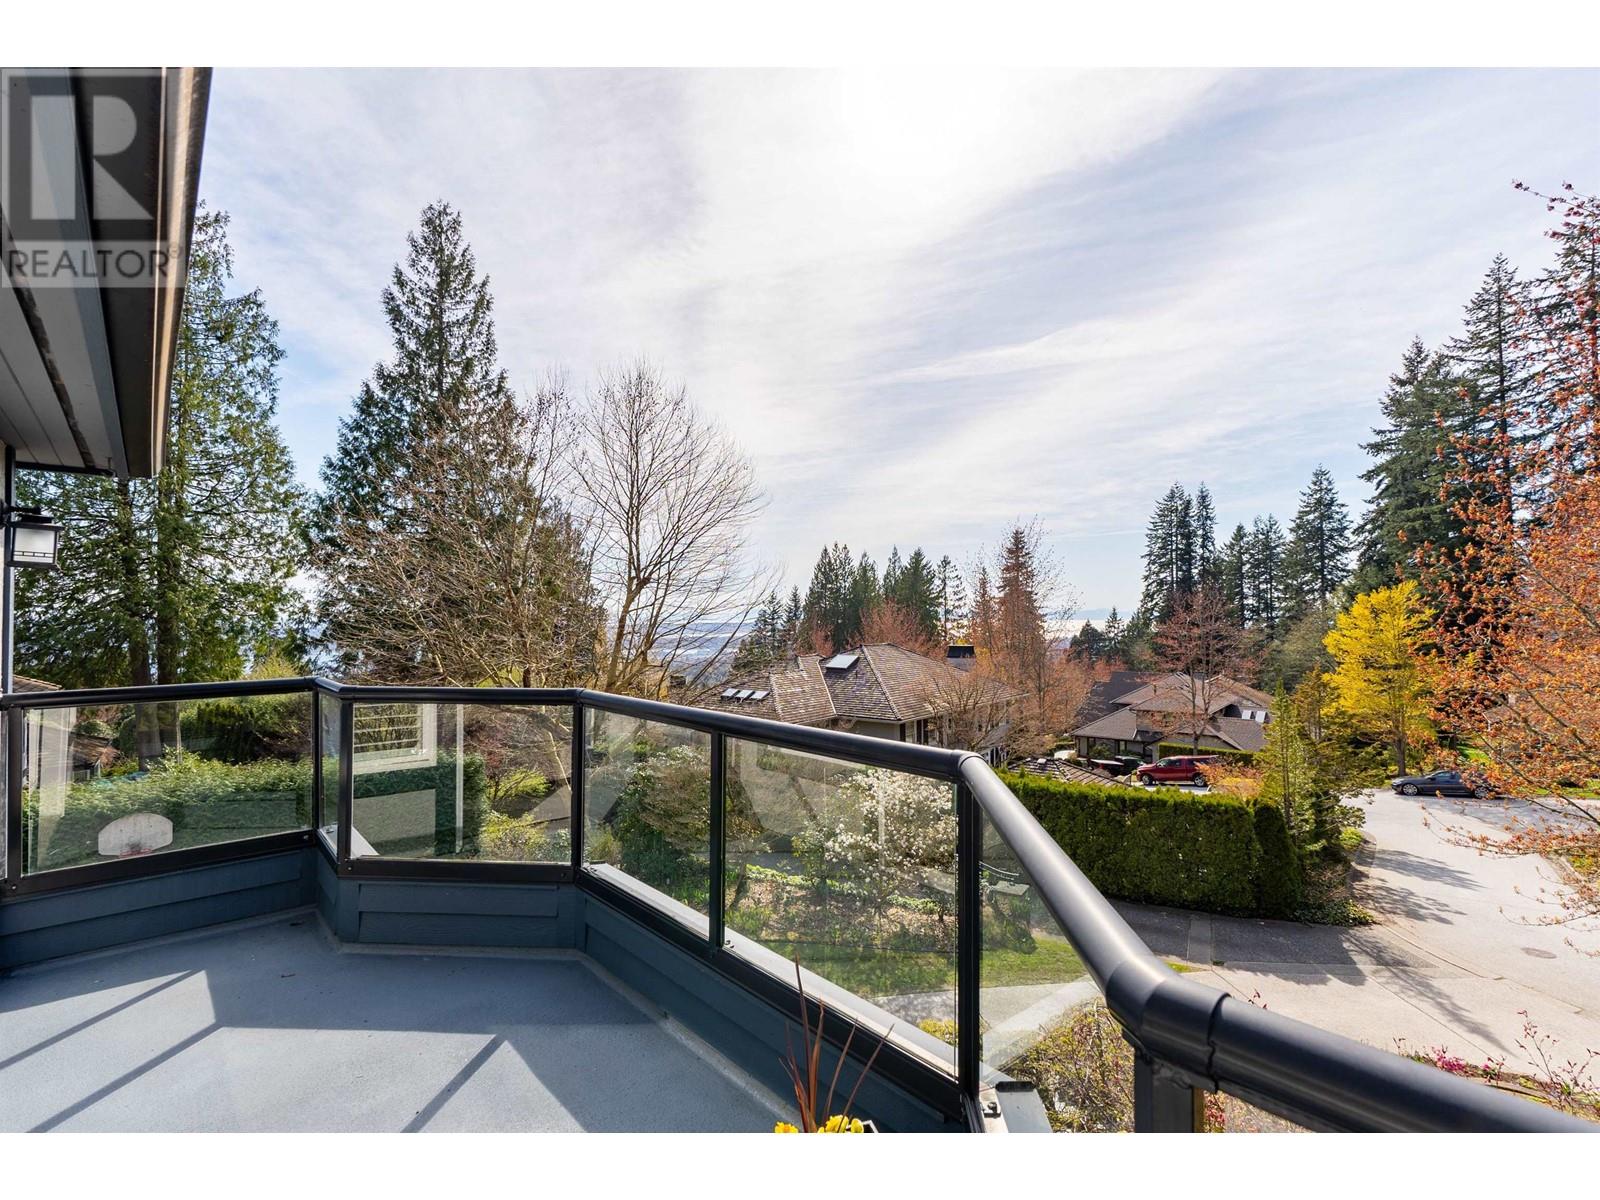 4188 COVENTRY WAY, North Vancouver